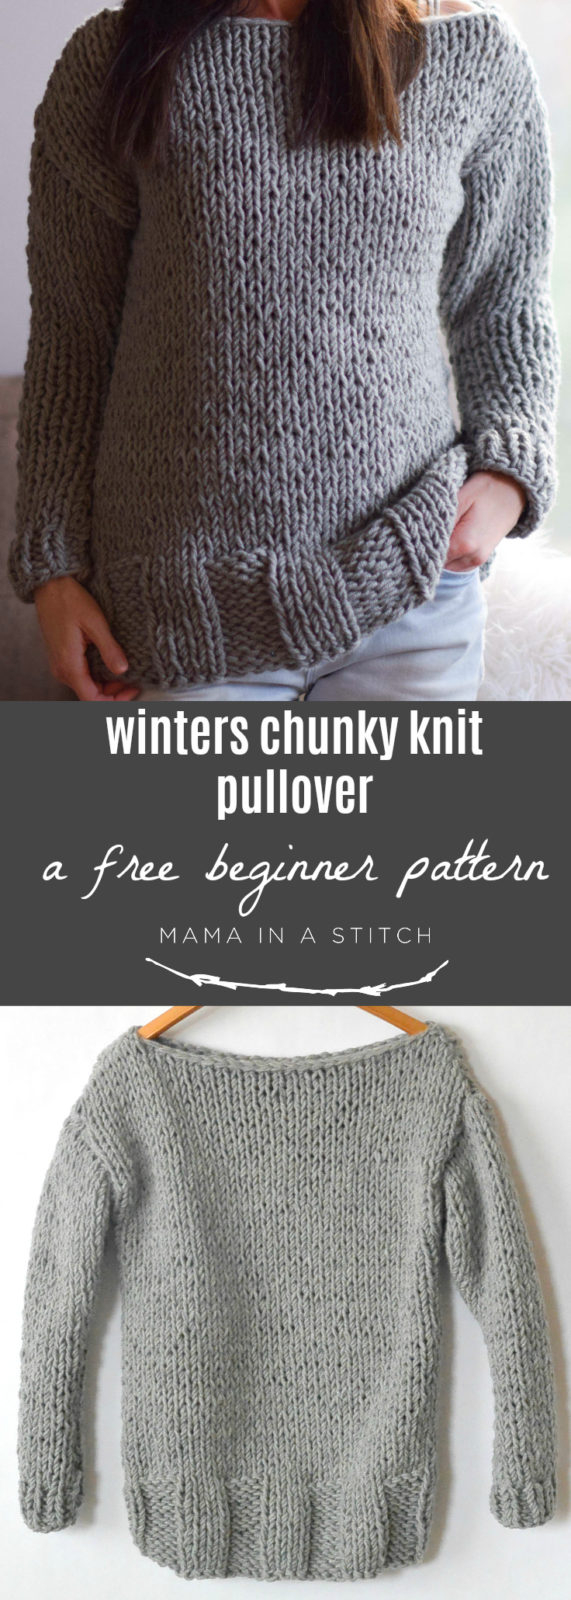 Free Bulky Knitting Patterns Winters Chunky Easy Knit Pullover Pattern Mama In A Stitch